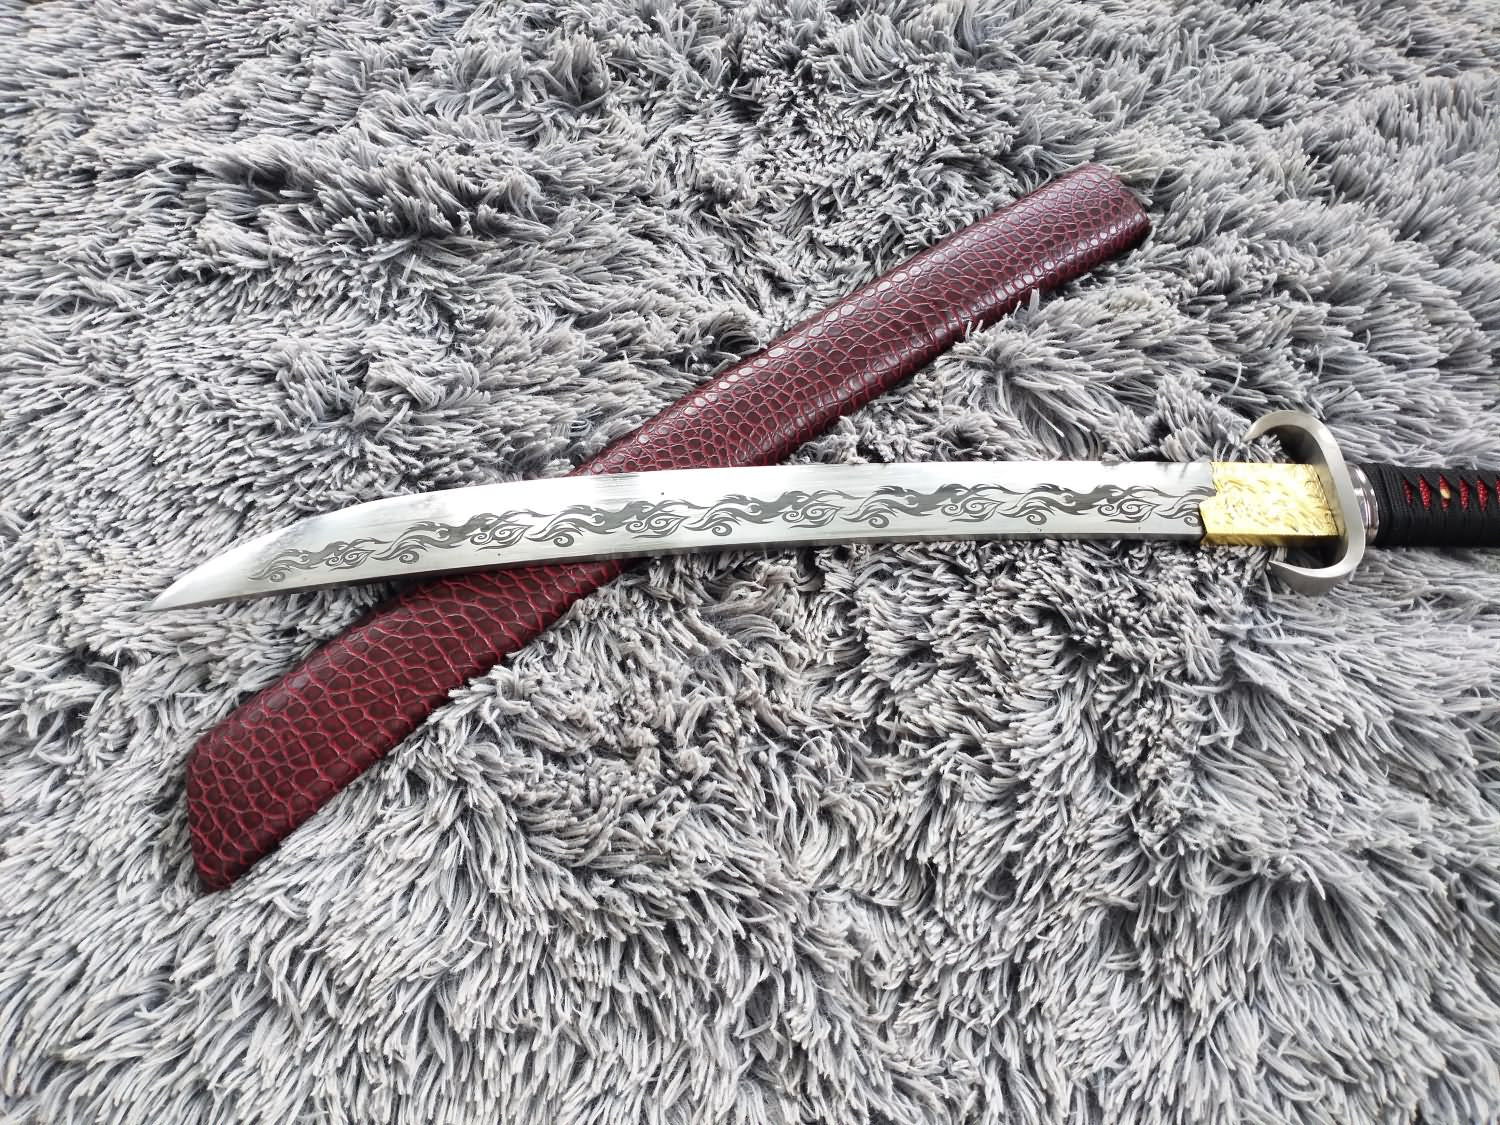 High Carbon Steel Etch Blade Chinese Handmade Sword, 27" Overall Length